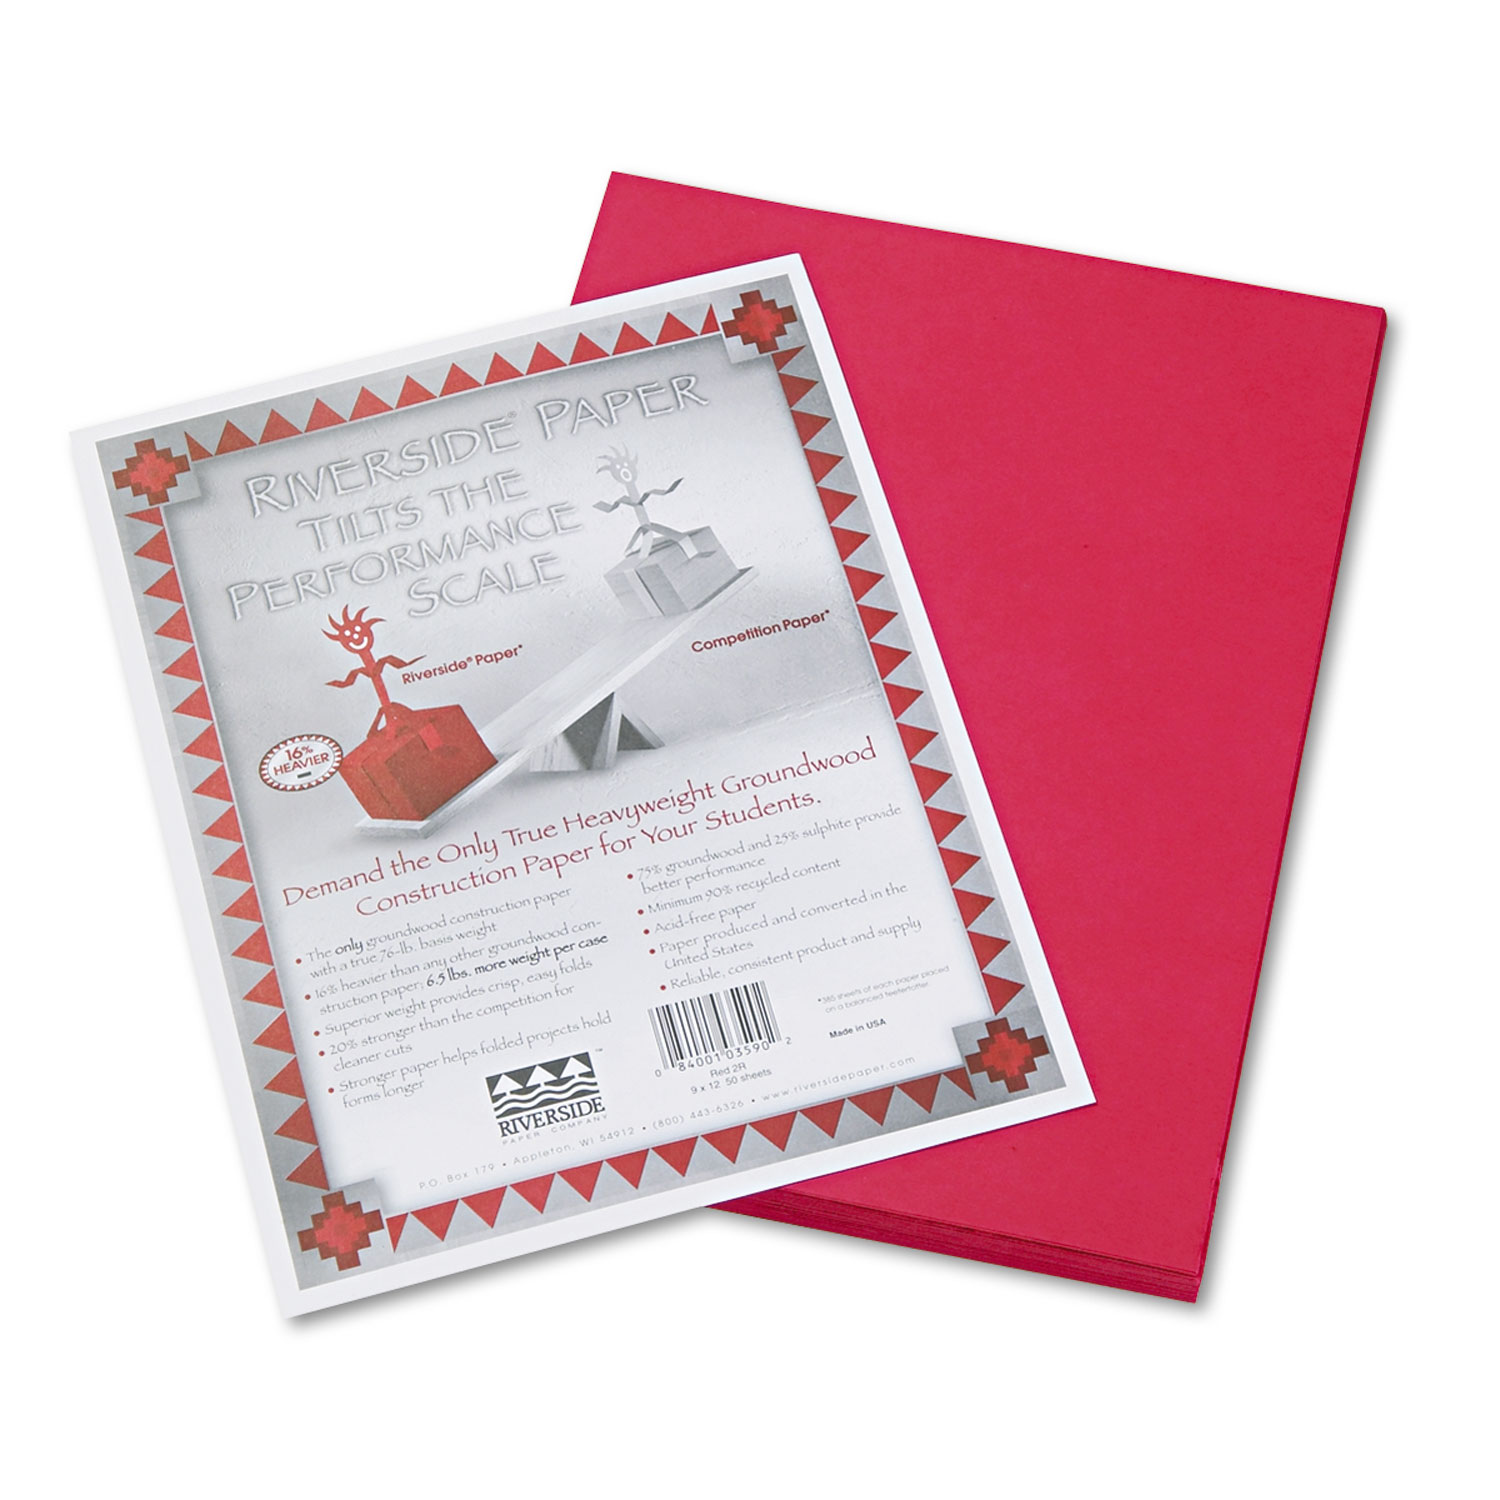  Pacon 103590 Riverside Construction Paper, 76lb, 9 x 12, Red, 50/Pack (PAC103590) 